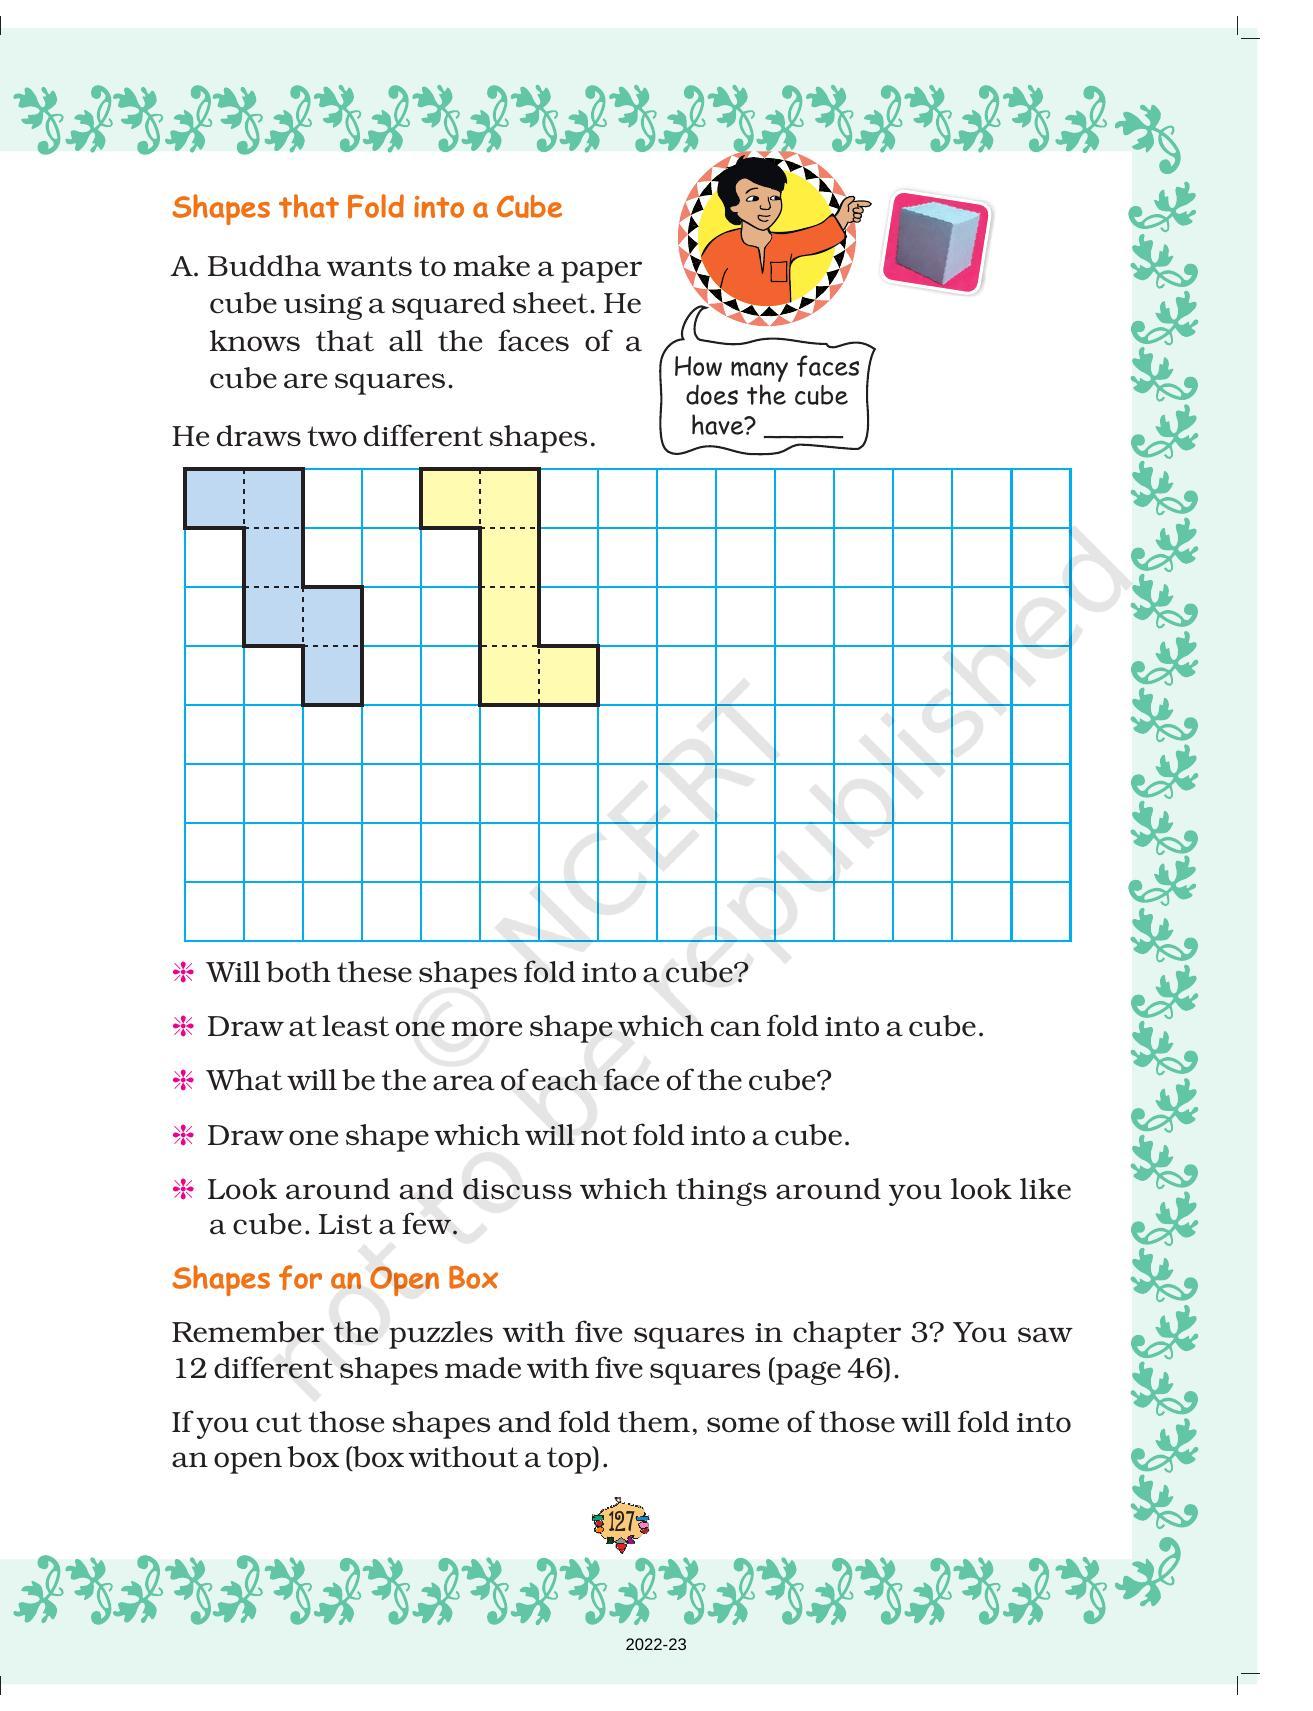 NCERT Book for Class 5 Maths Chapter 9 Boxes and Sketches - Page 2